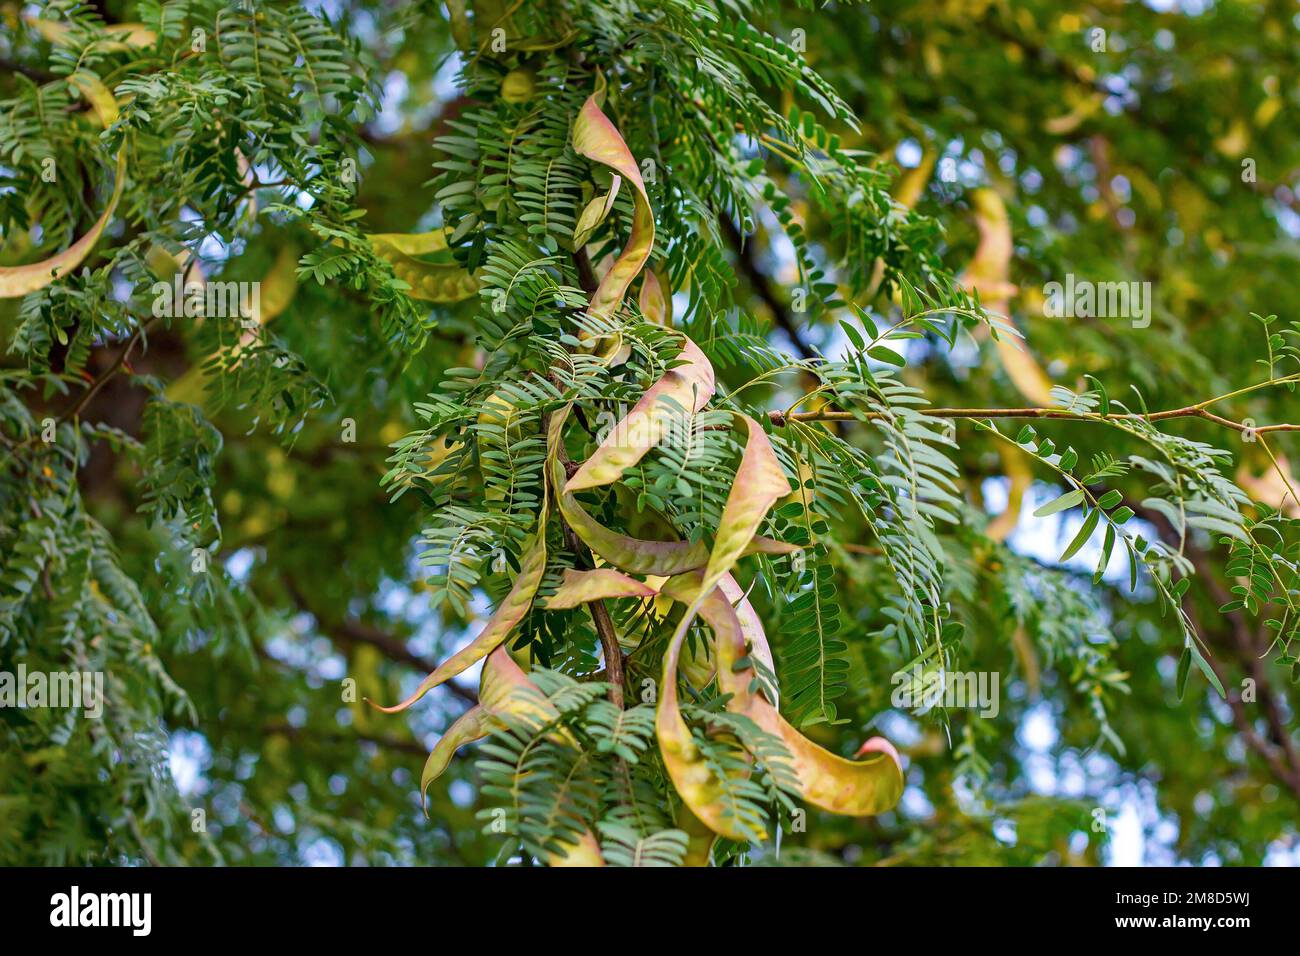 Bright green leaves and seed pods of Honey Locust (Gleditsia Triacanthos) bush in the botanic garden in summer close up. Stock Photo